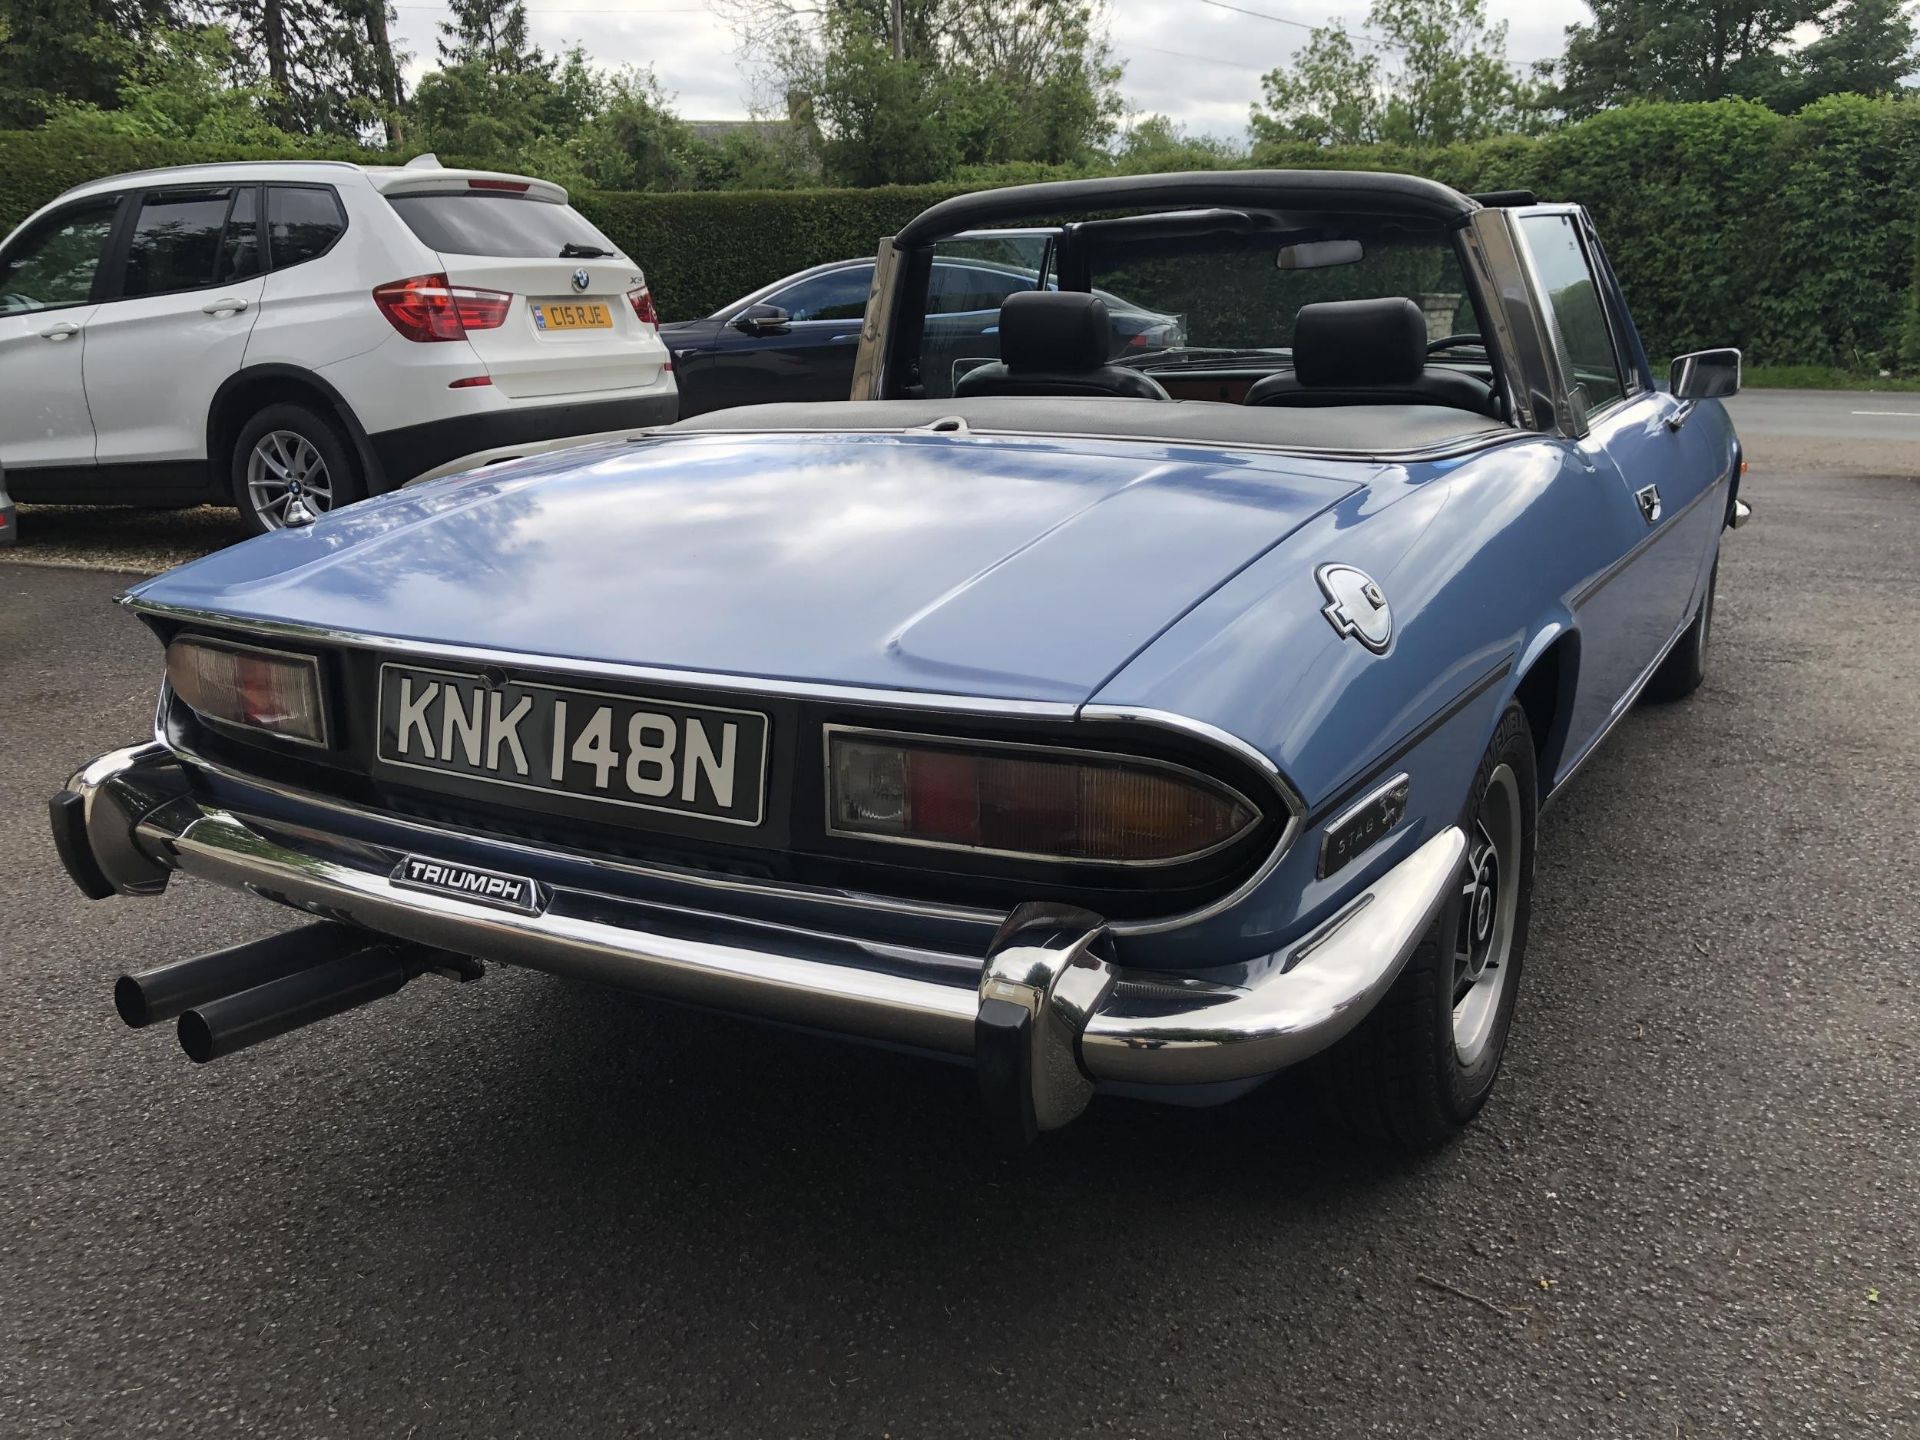 1975 Triumph Stag Registration number KNK 148N French blue with a black interior Automatic Gearbox - Image 4 of 57